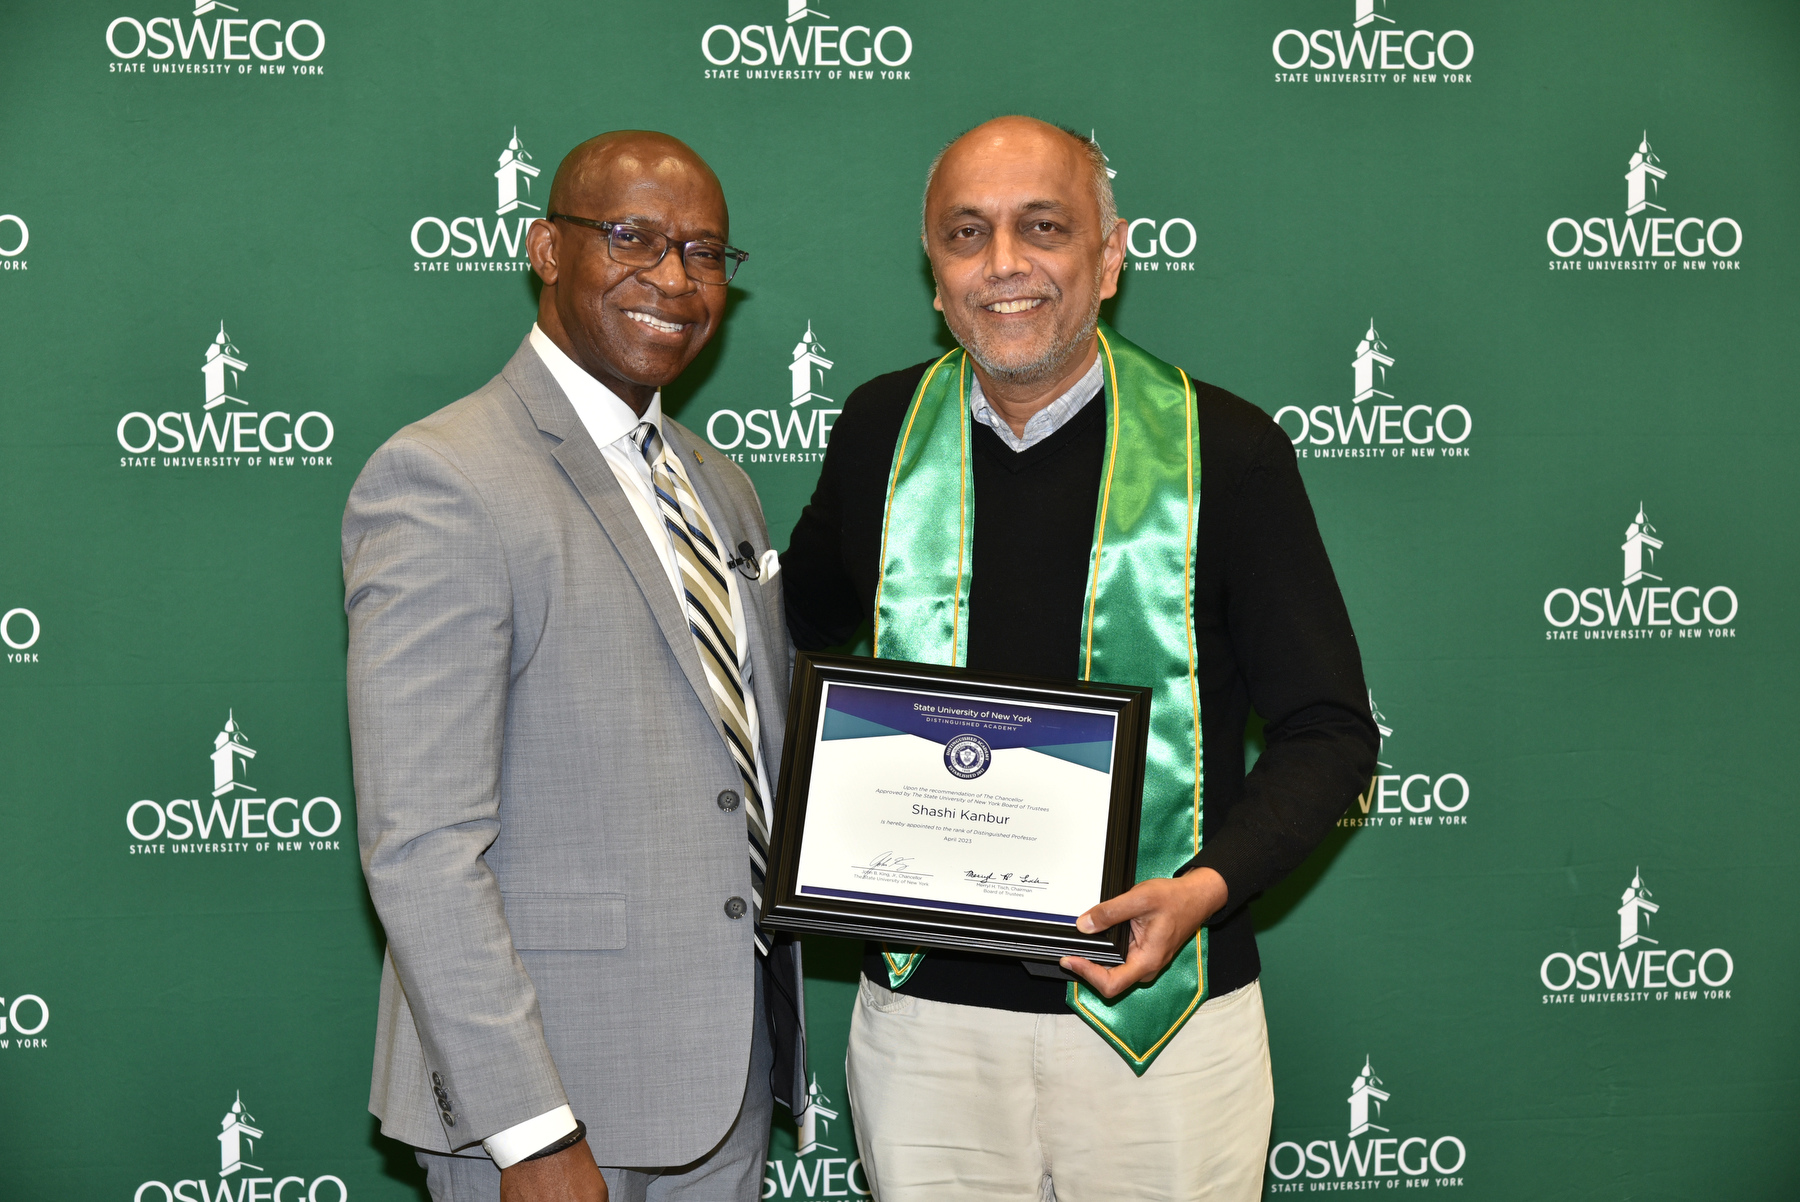 Shashi Kanbur of physics was officially appointed to the rank of Distinguished Professor, presented by President Peter O. Nwosu during the Opening Breakfast.